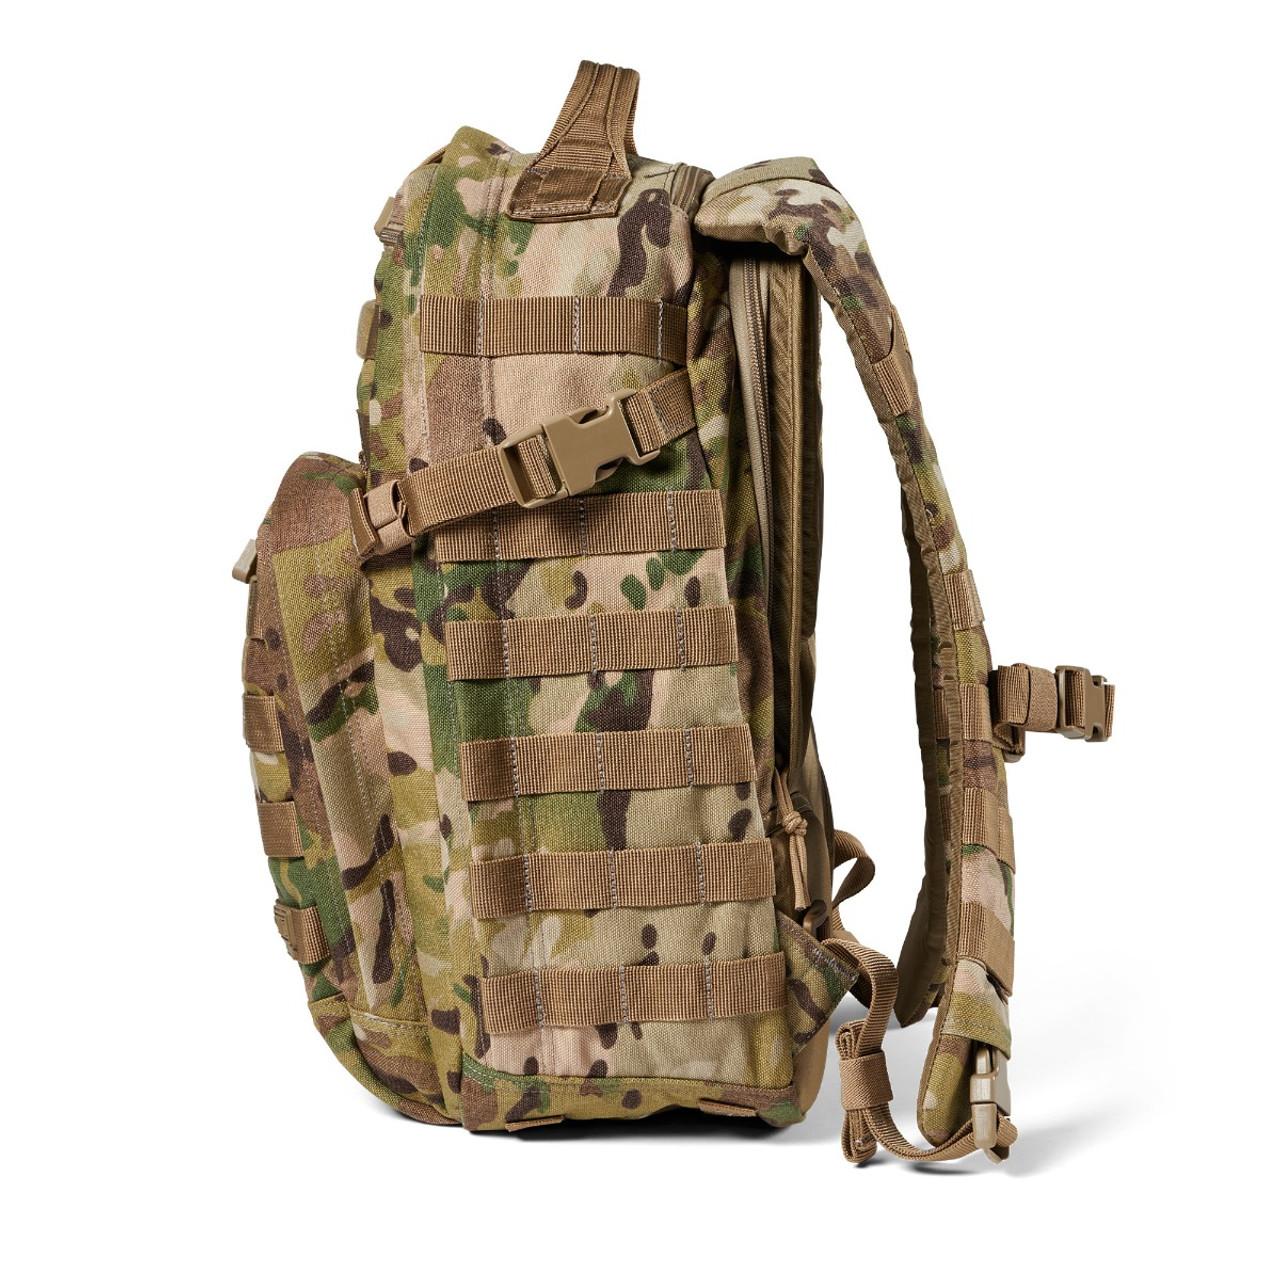 5.11 Tactical RUSH 12 2.0, Military Backpack